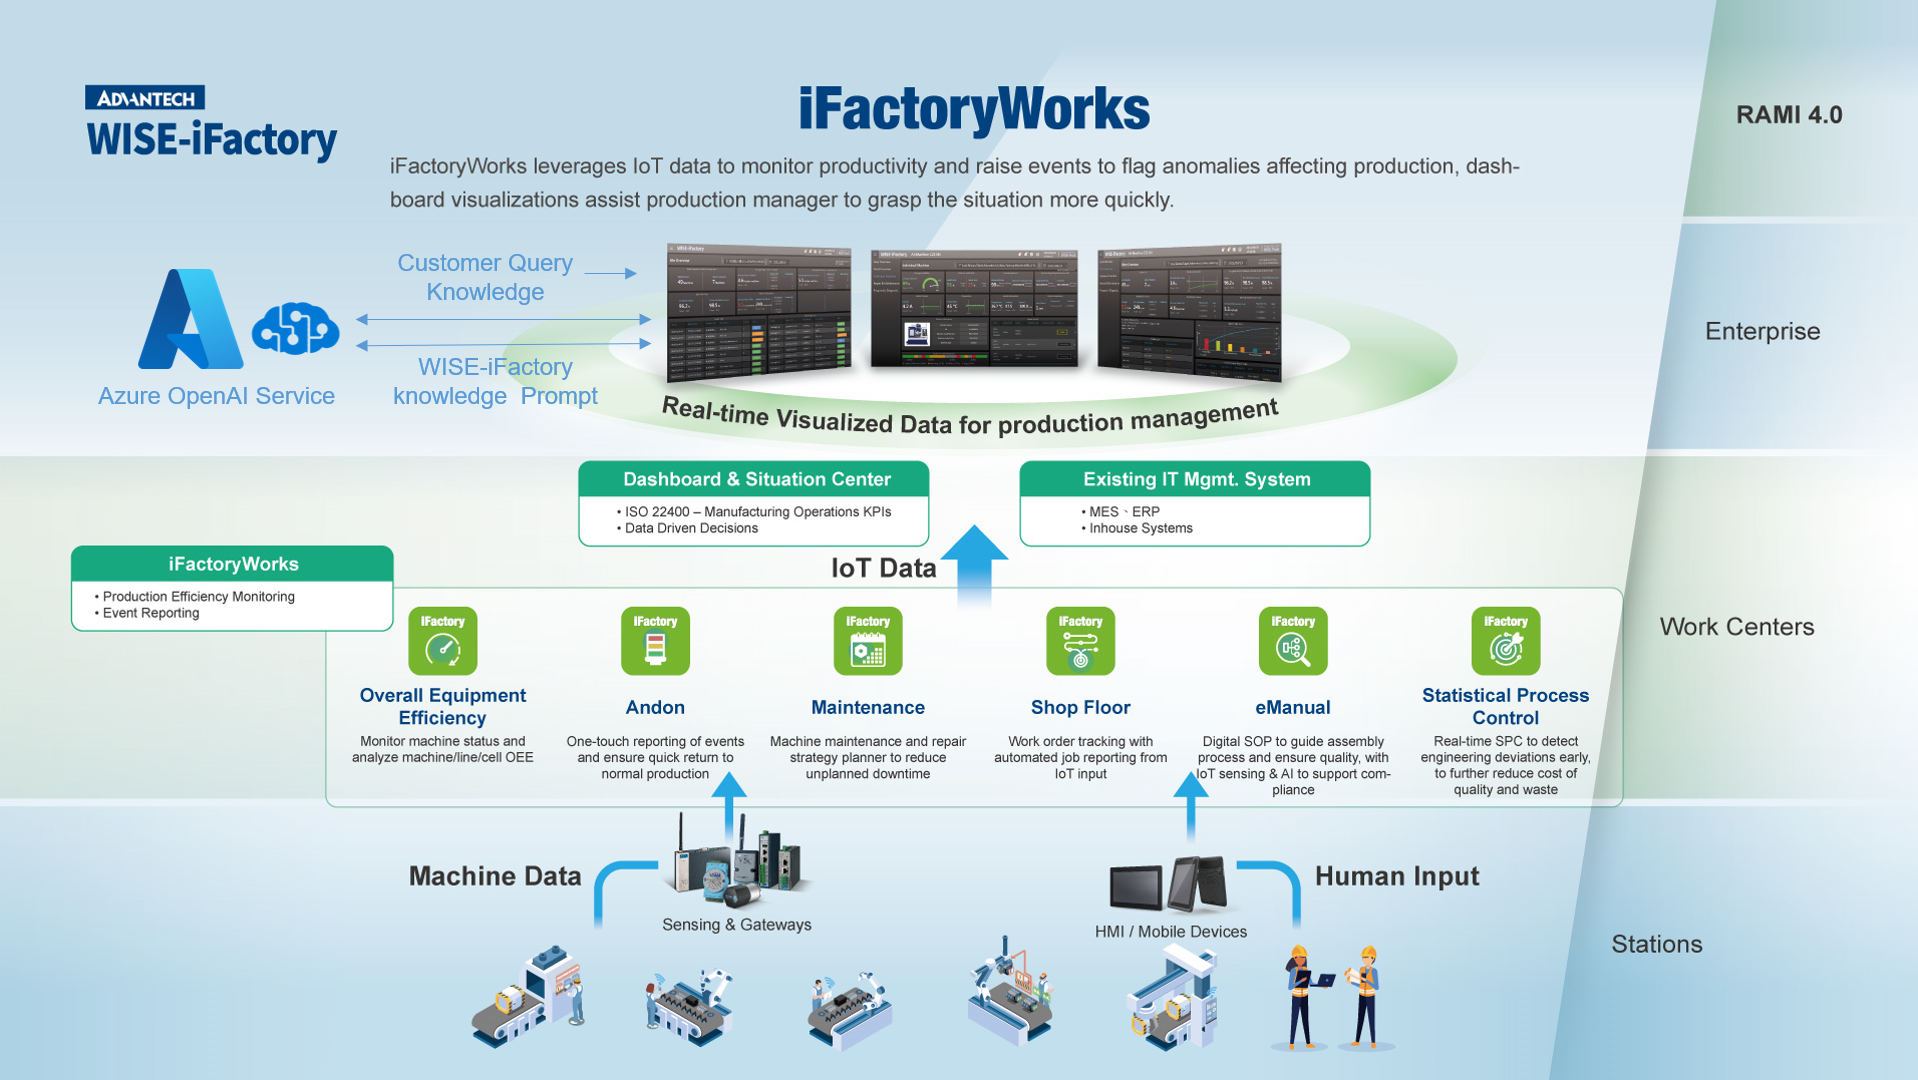 System Architectures of iFactoryWorks Architecture